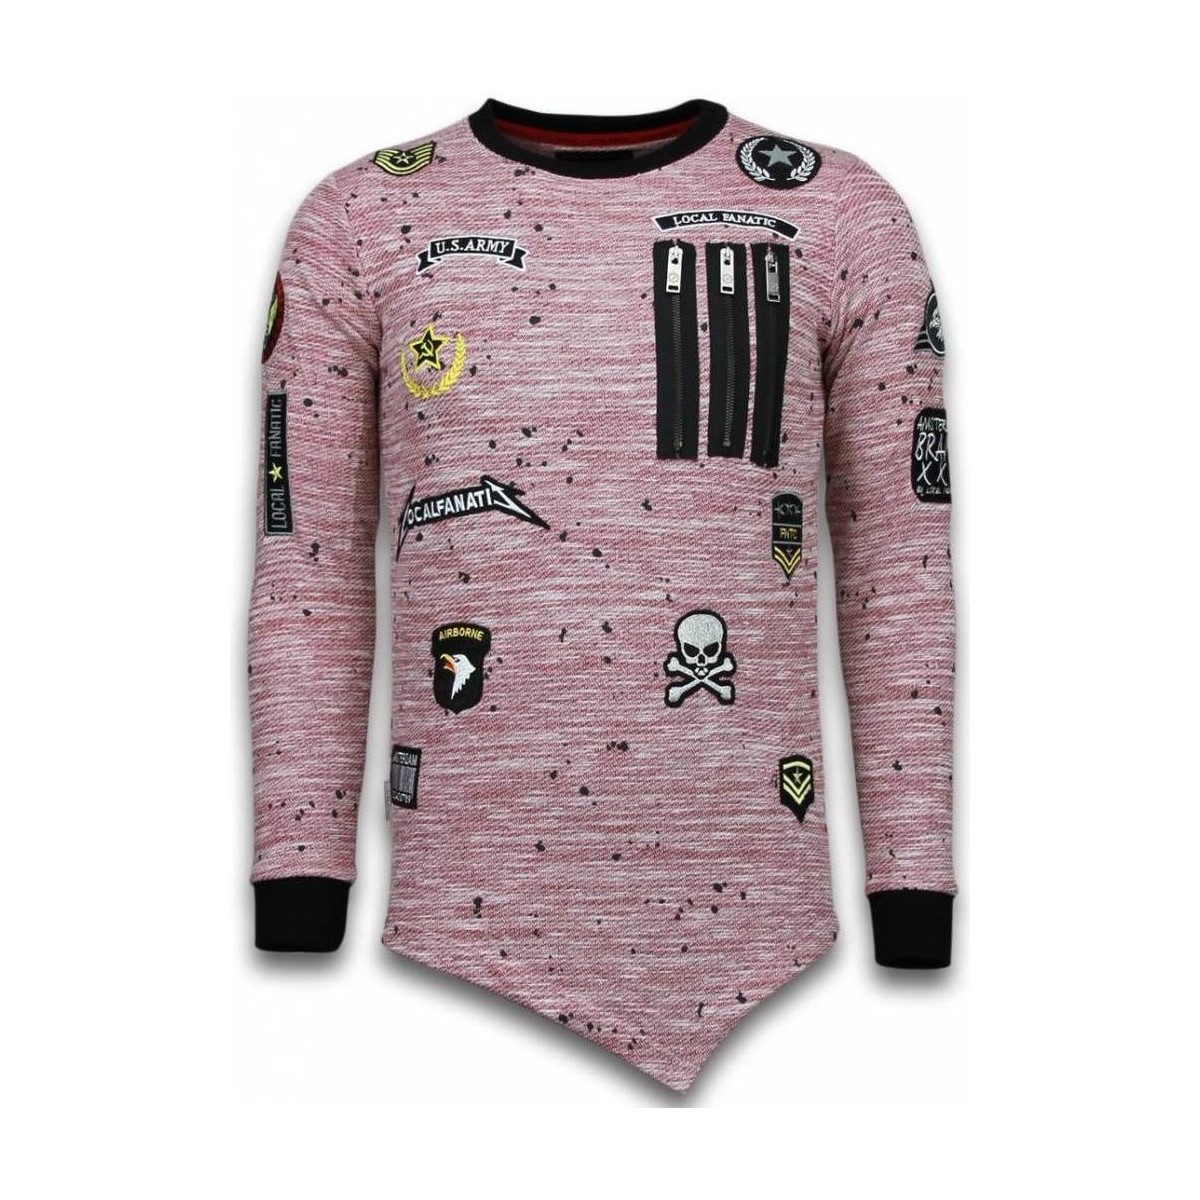 Textiel Heren Sweaters / Sweatshirts Local Fanatic Longfit Asymric Embroidery Patches Roze